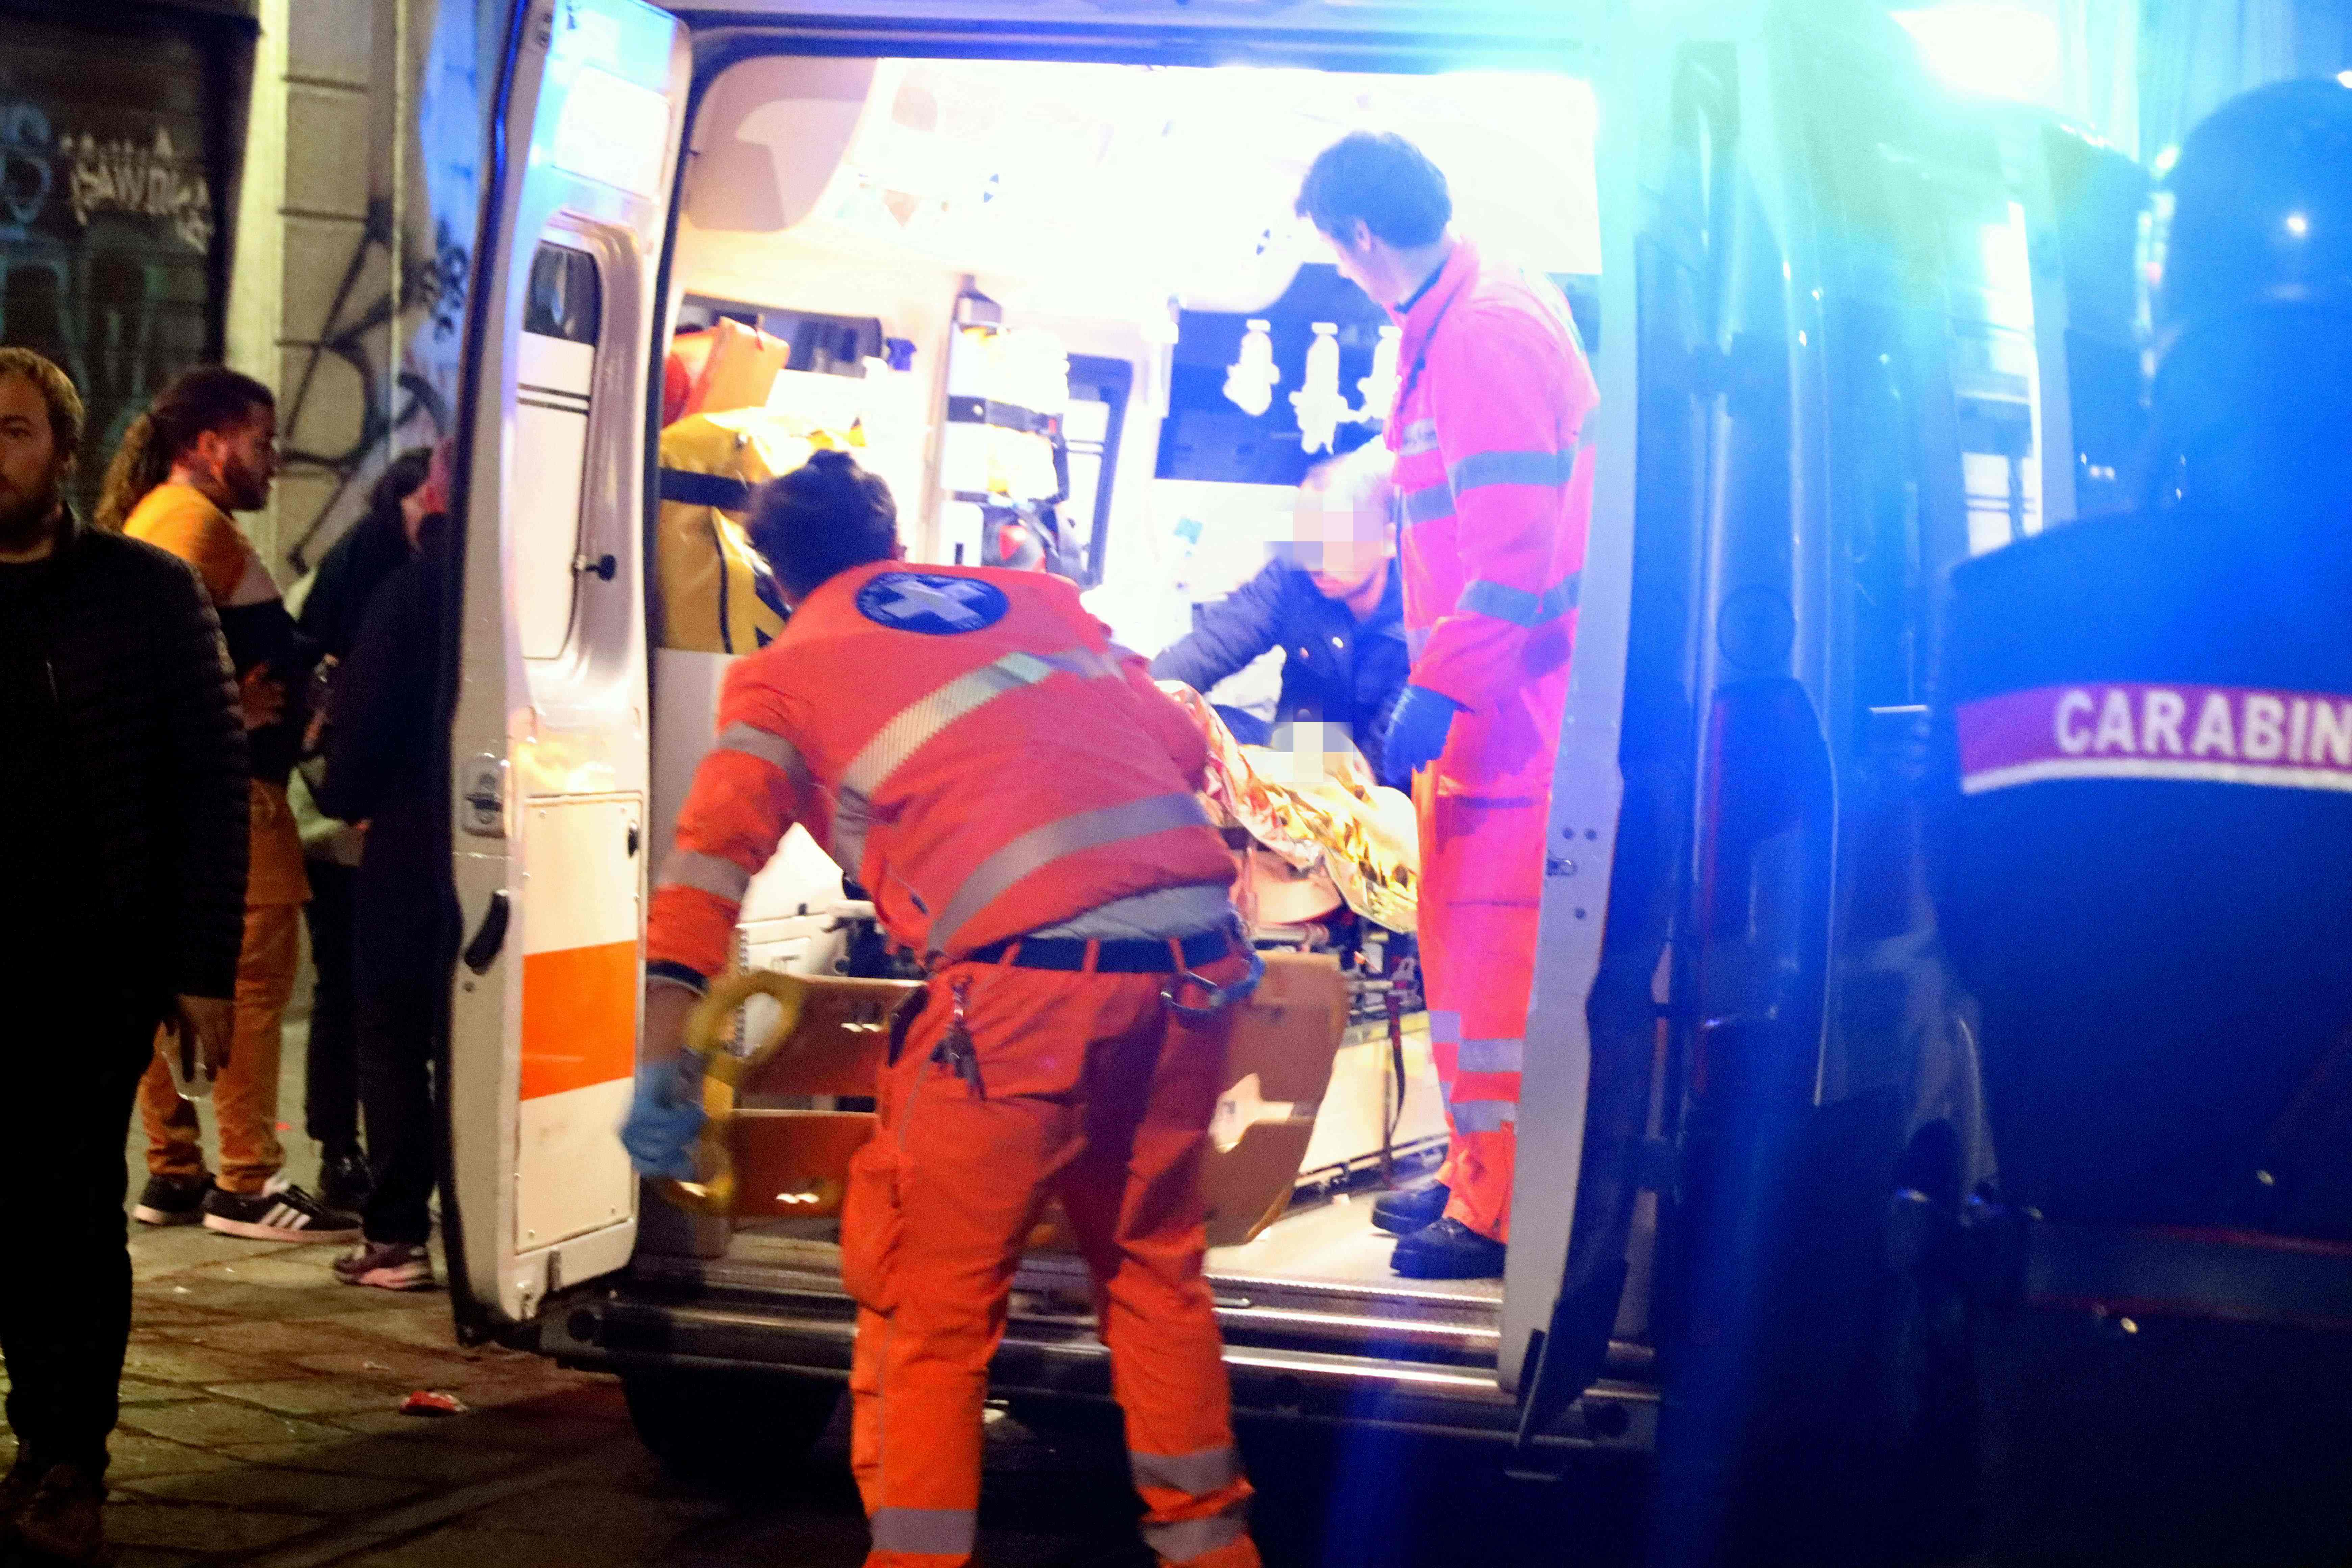 Serious clash between PSG and Milan fans leaves one victim stabbed and hospitalized